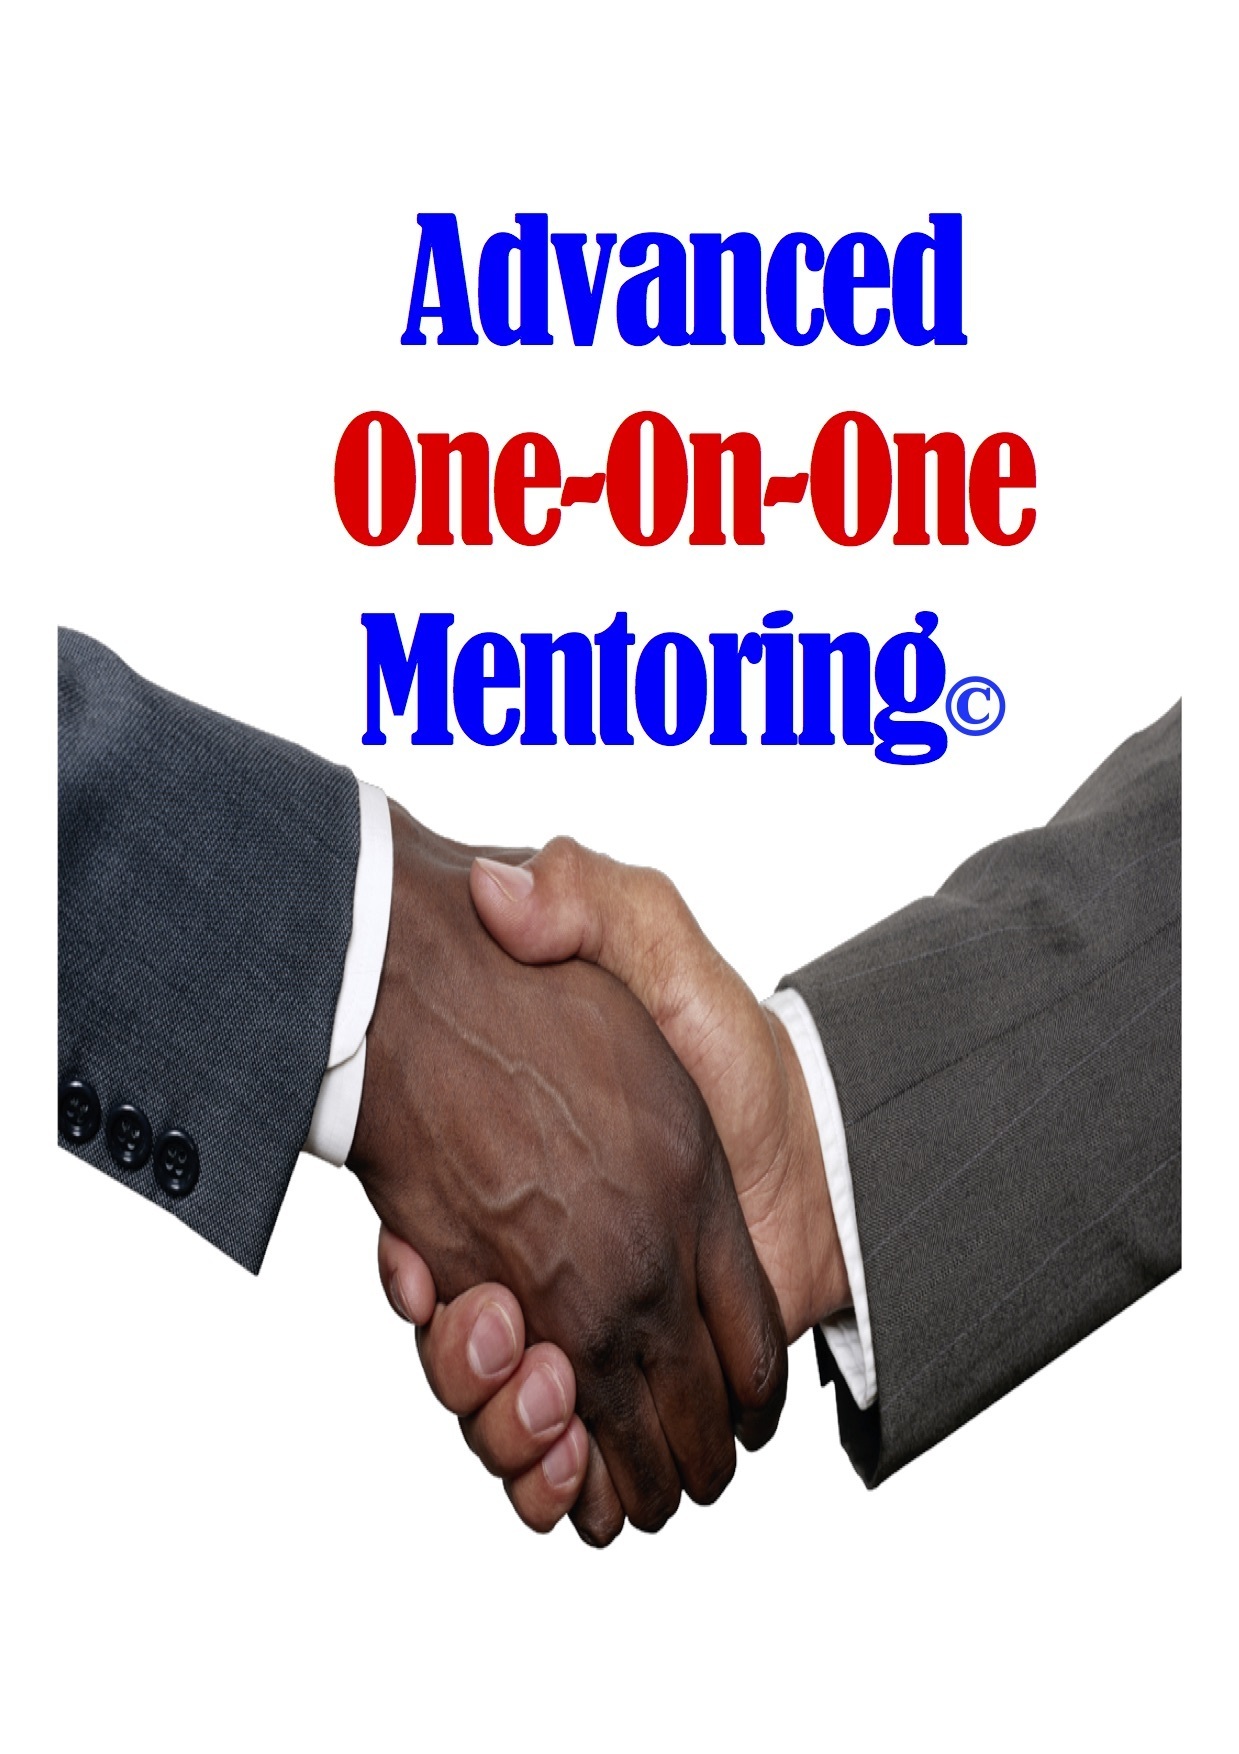 Advanced One-On-One Mentoring Sessions ©​ 00010